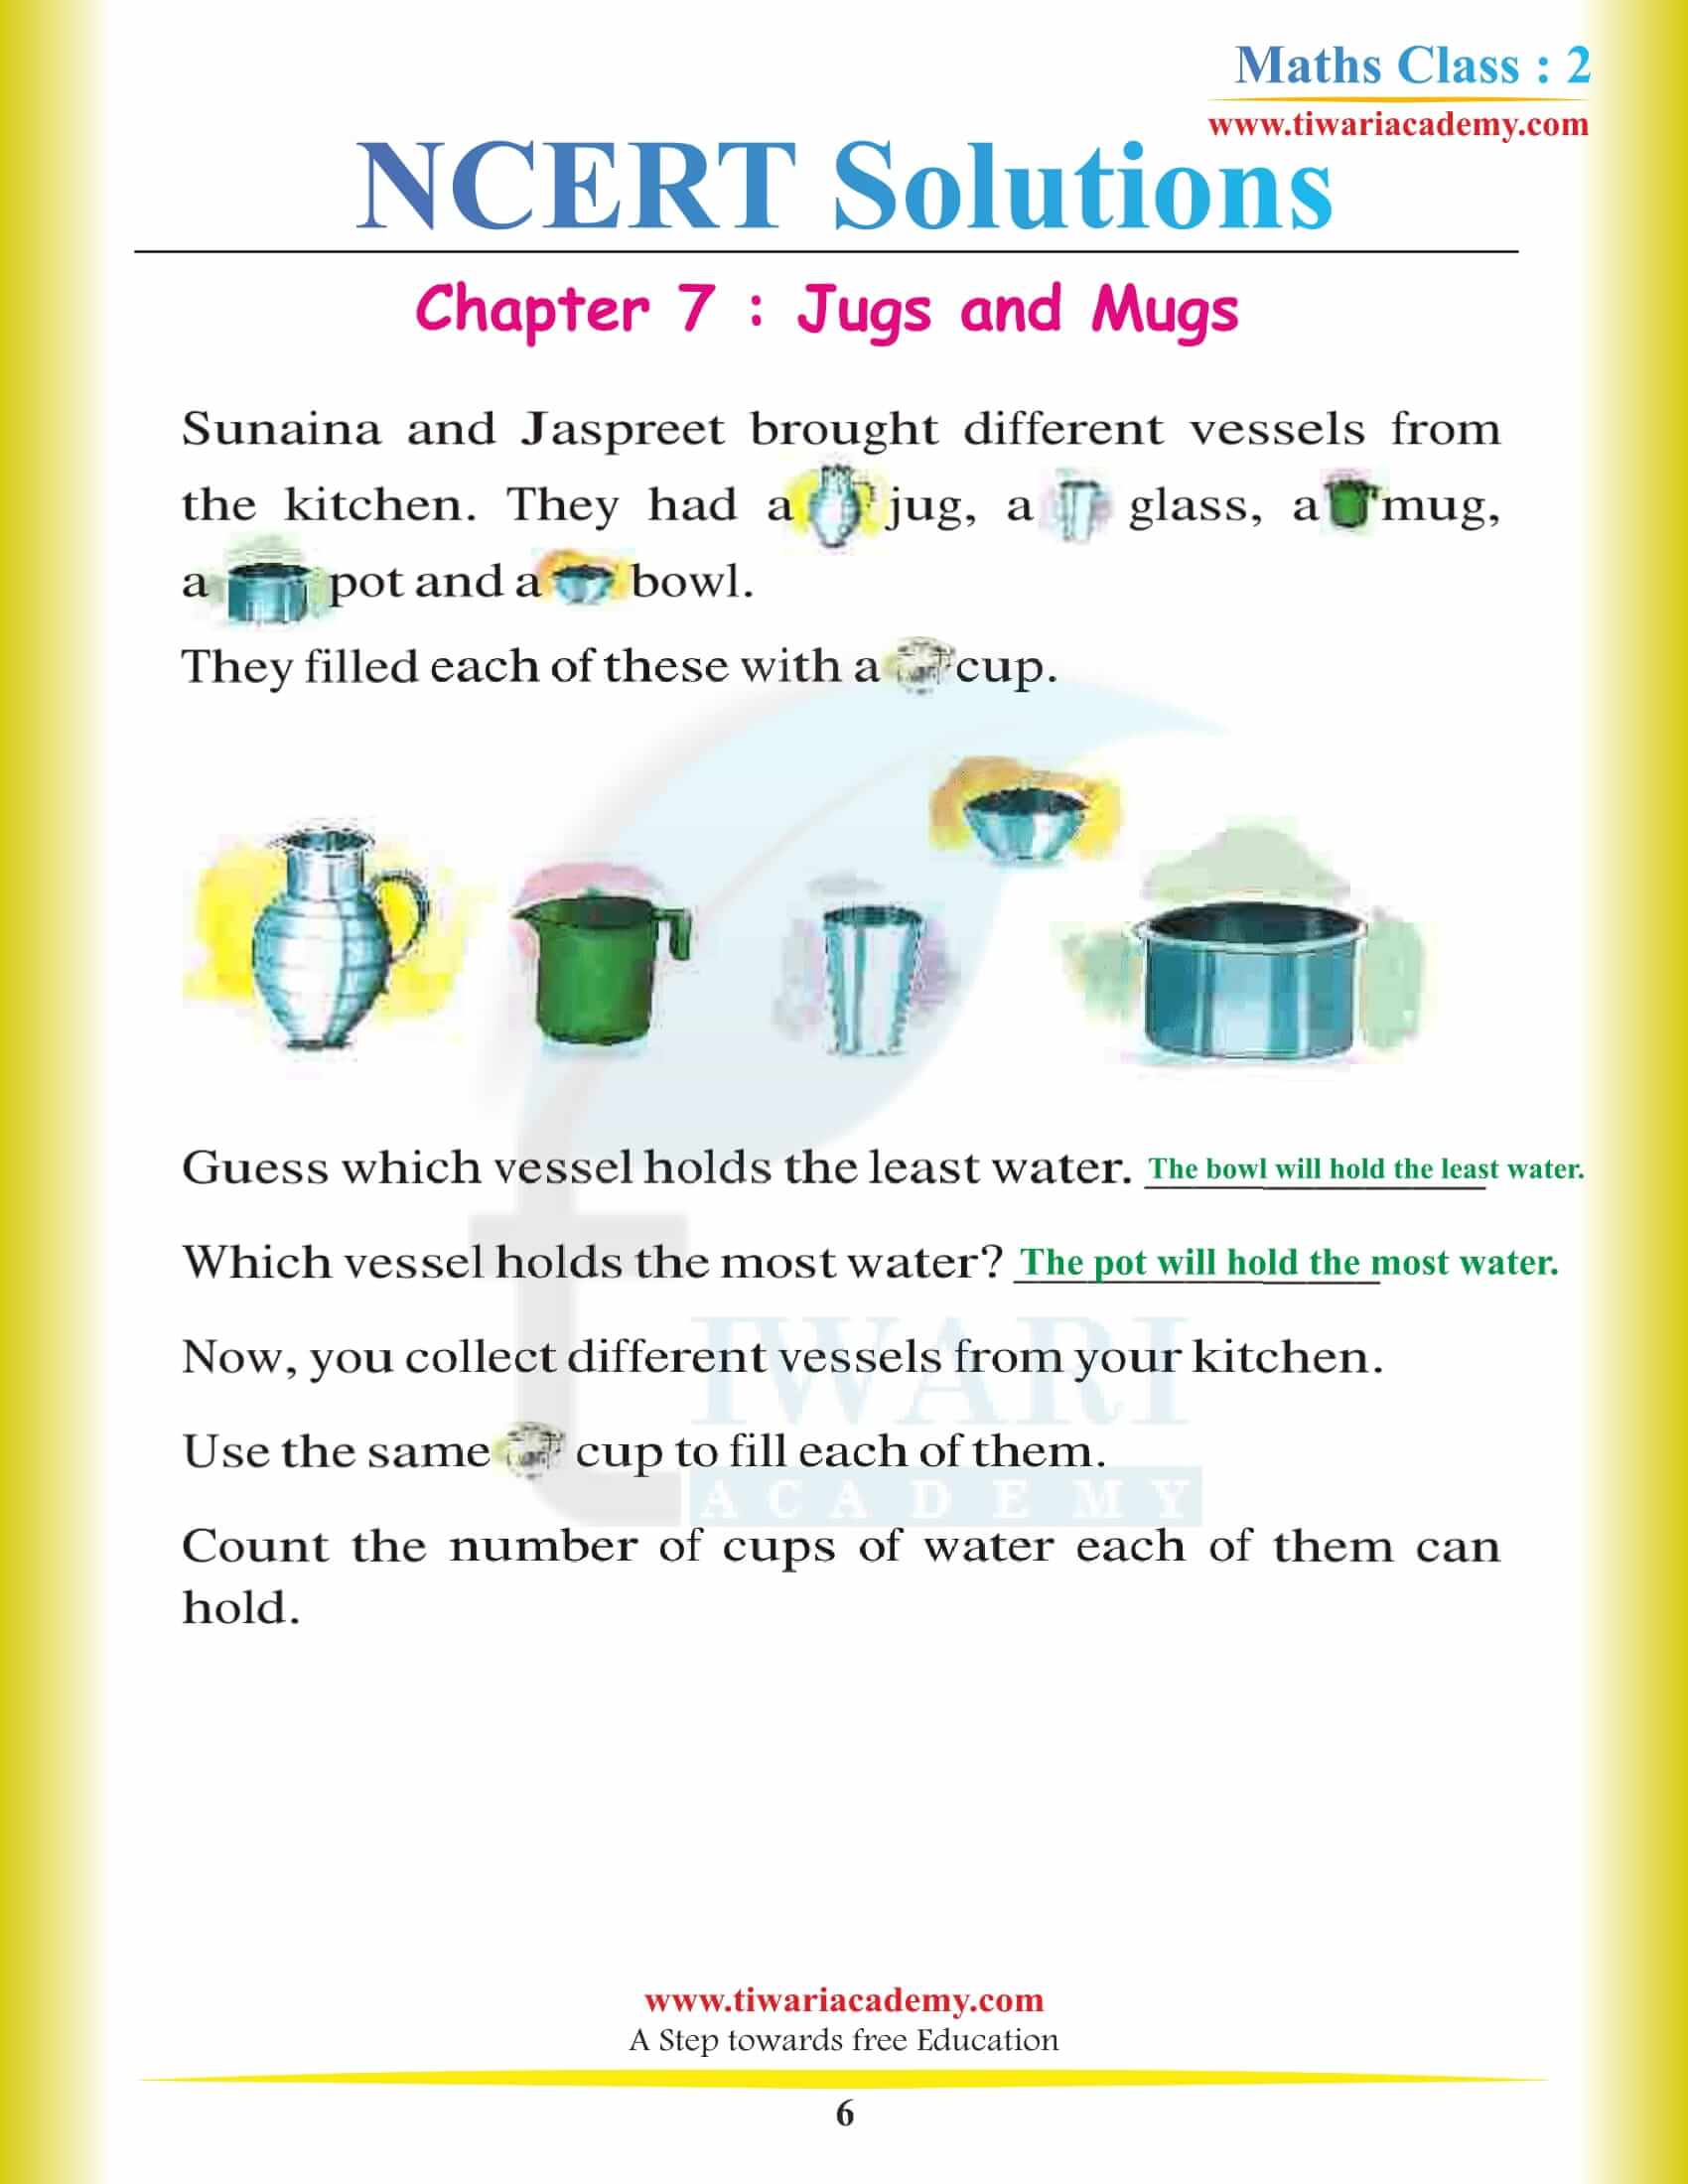 NCERT Solutions for Class 2 Maths Chapter 7 free download